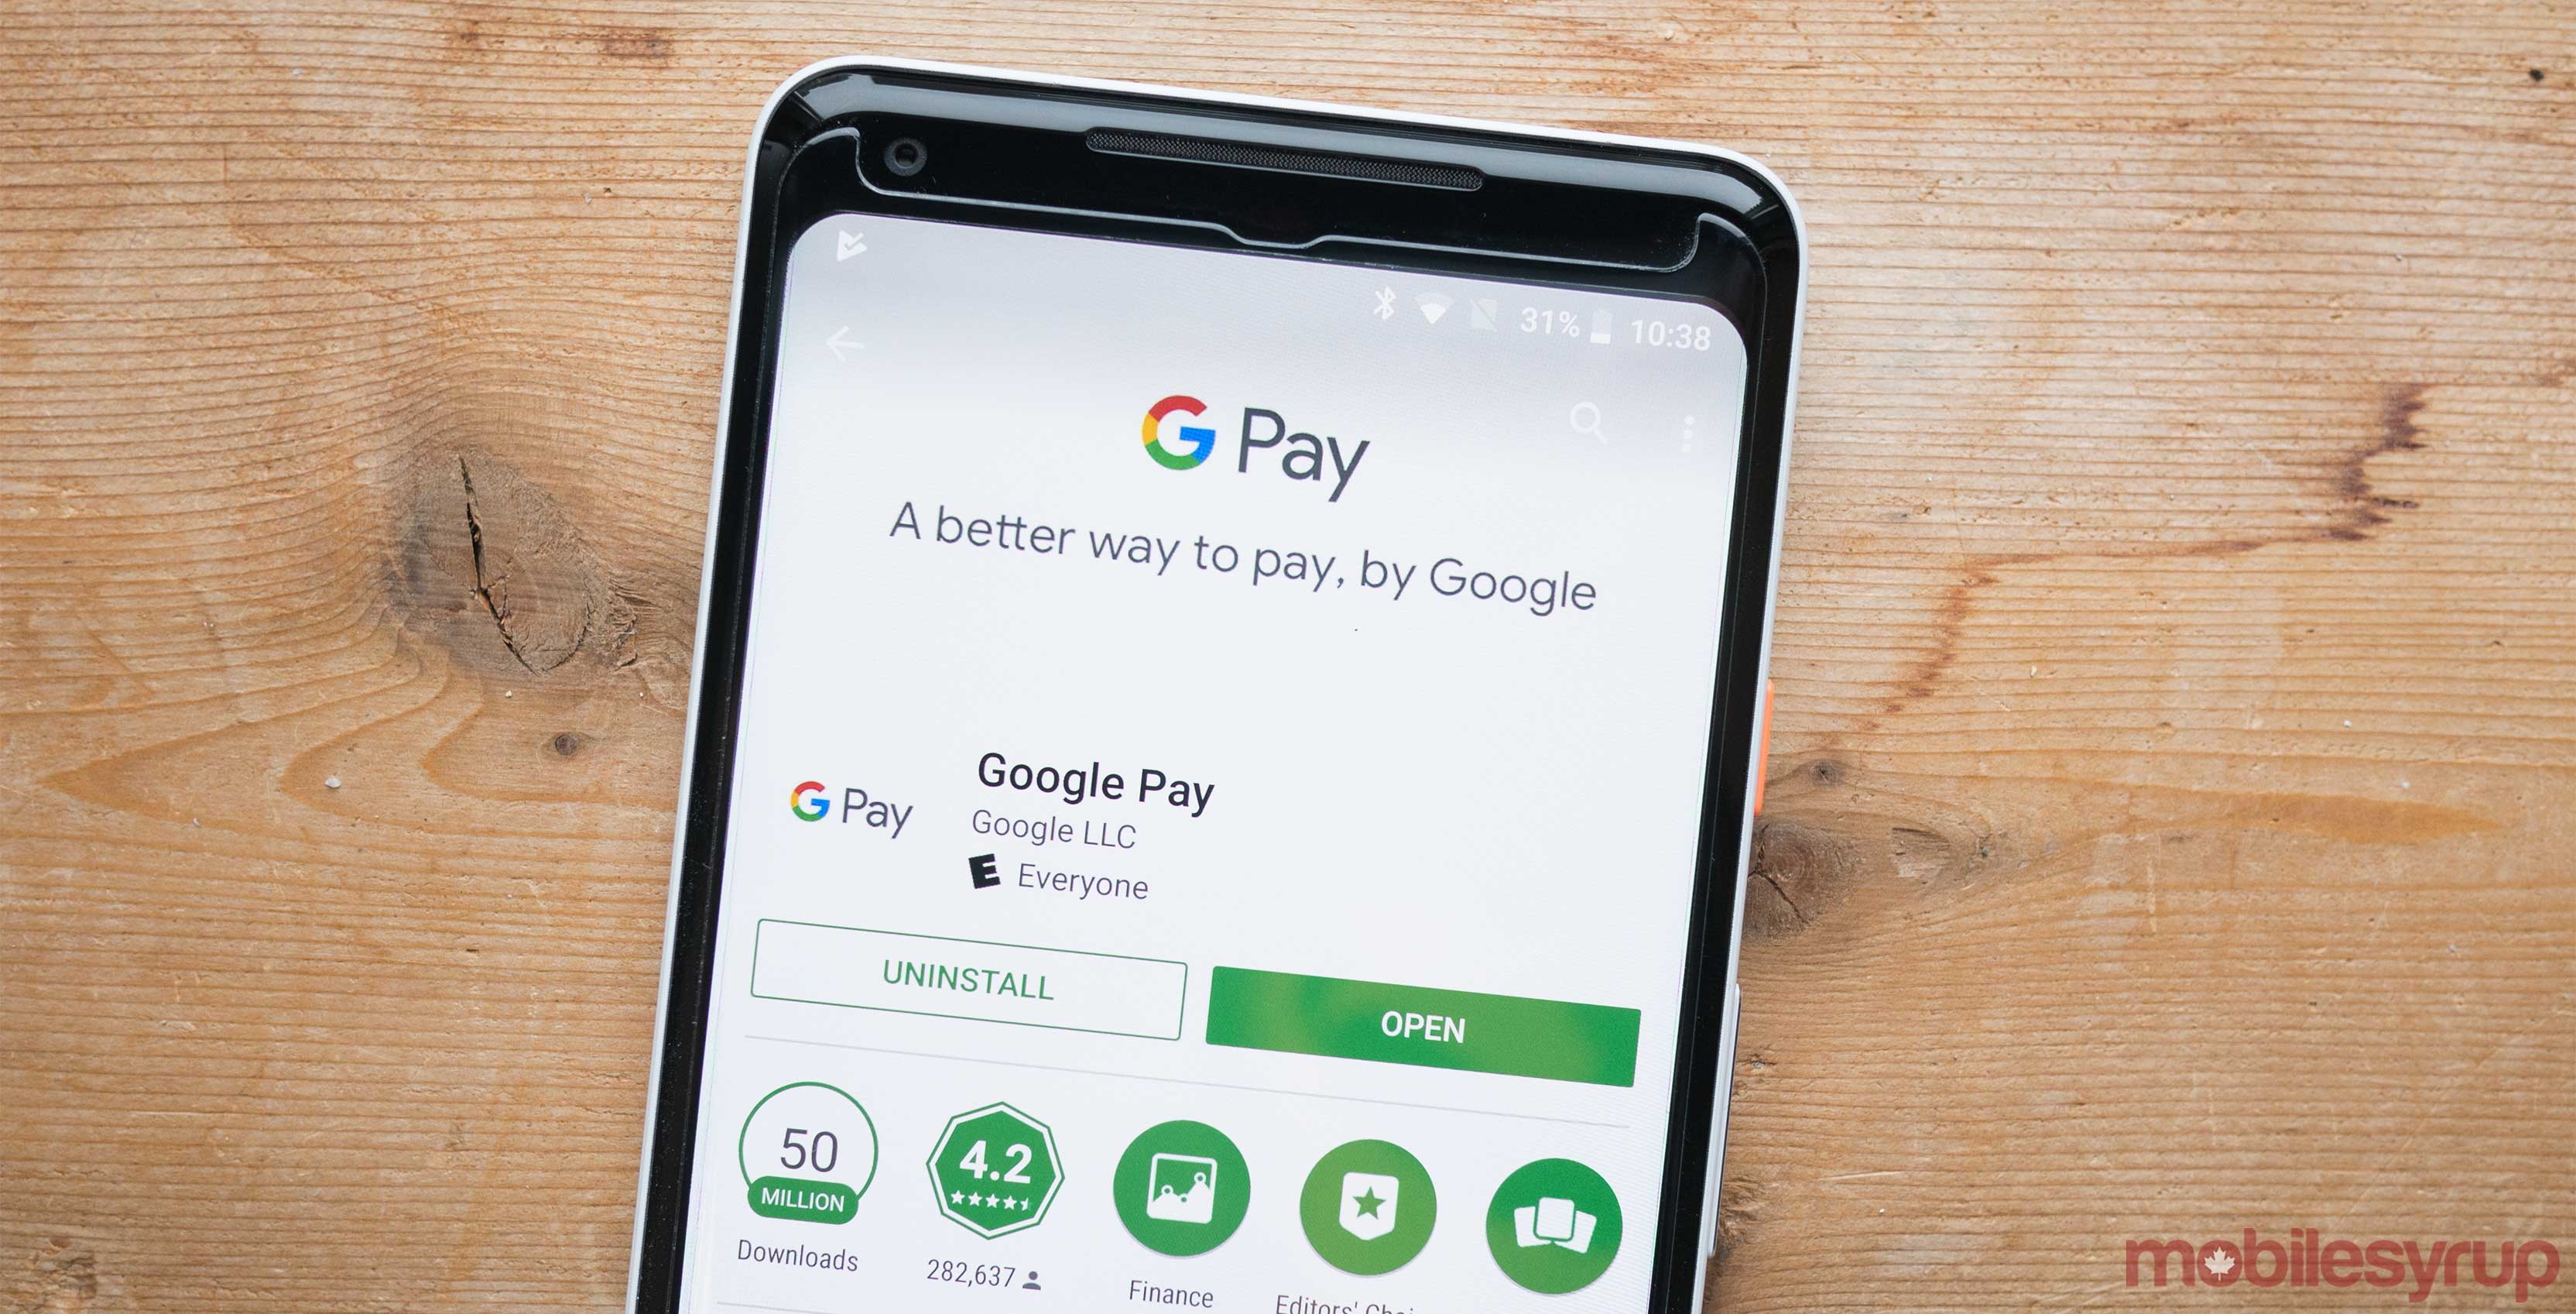 Google Pay on Android phone